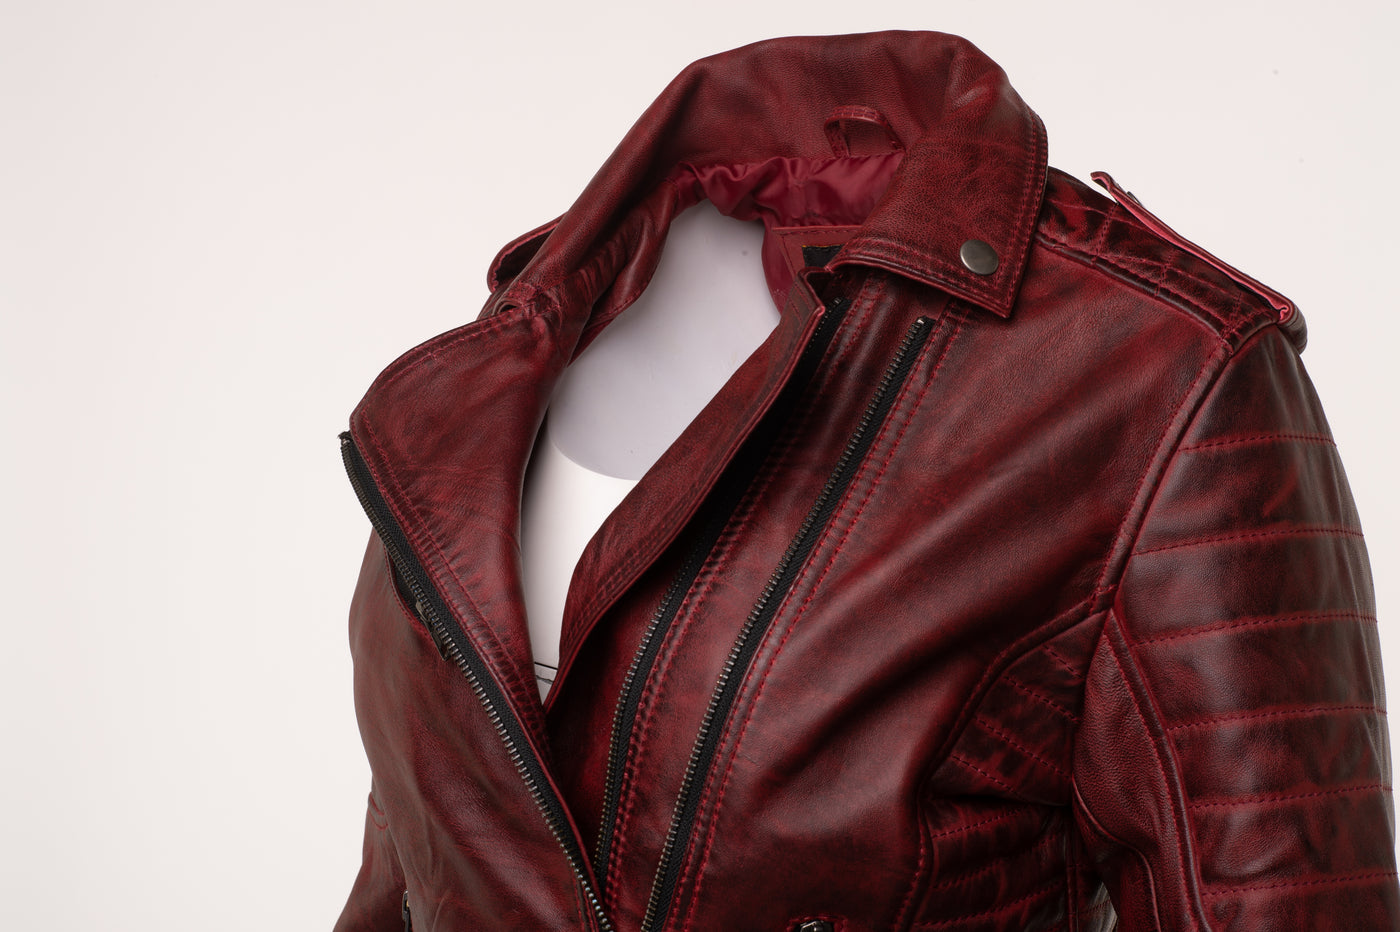 Marissa's vintage red diamond quilted leather jacket